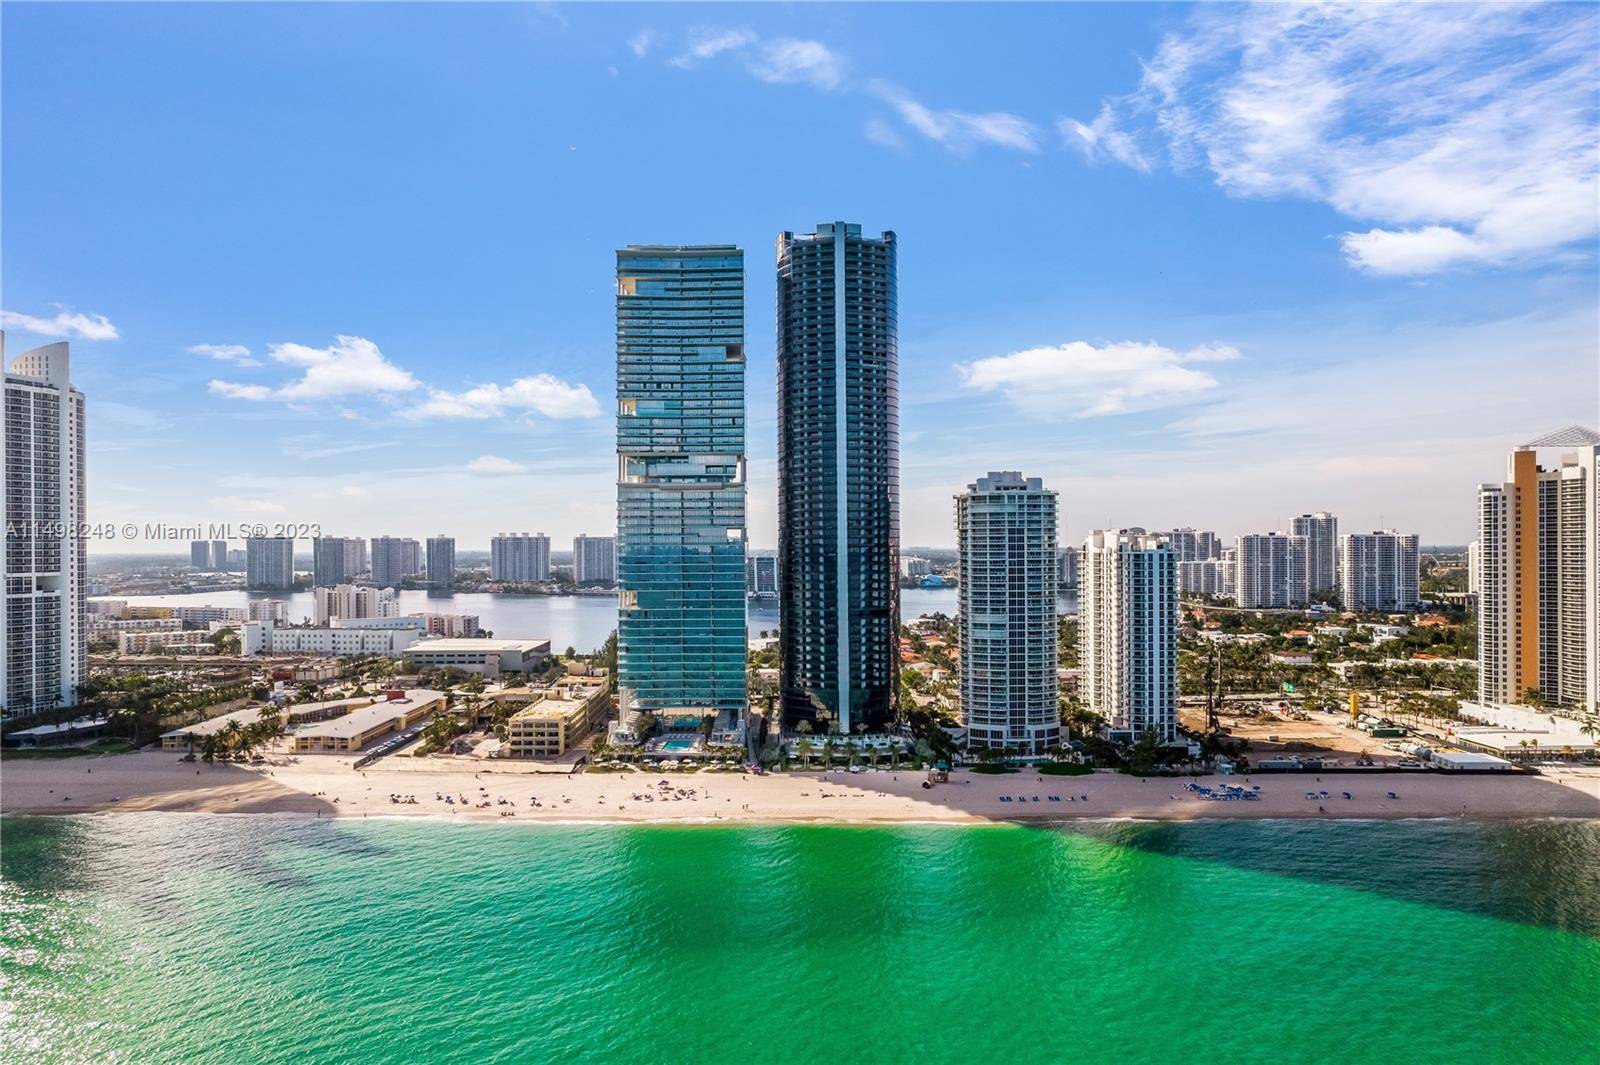 Nestled within the prestigious Porsche Tower in Sunny Isles Beach, unit 1503 offers a luxurious sanctuary with breathtaking vistas.